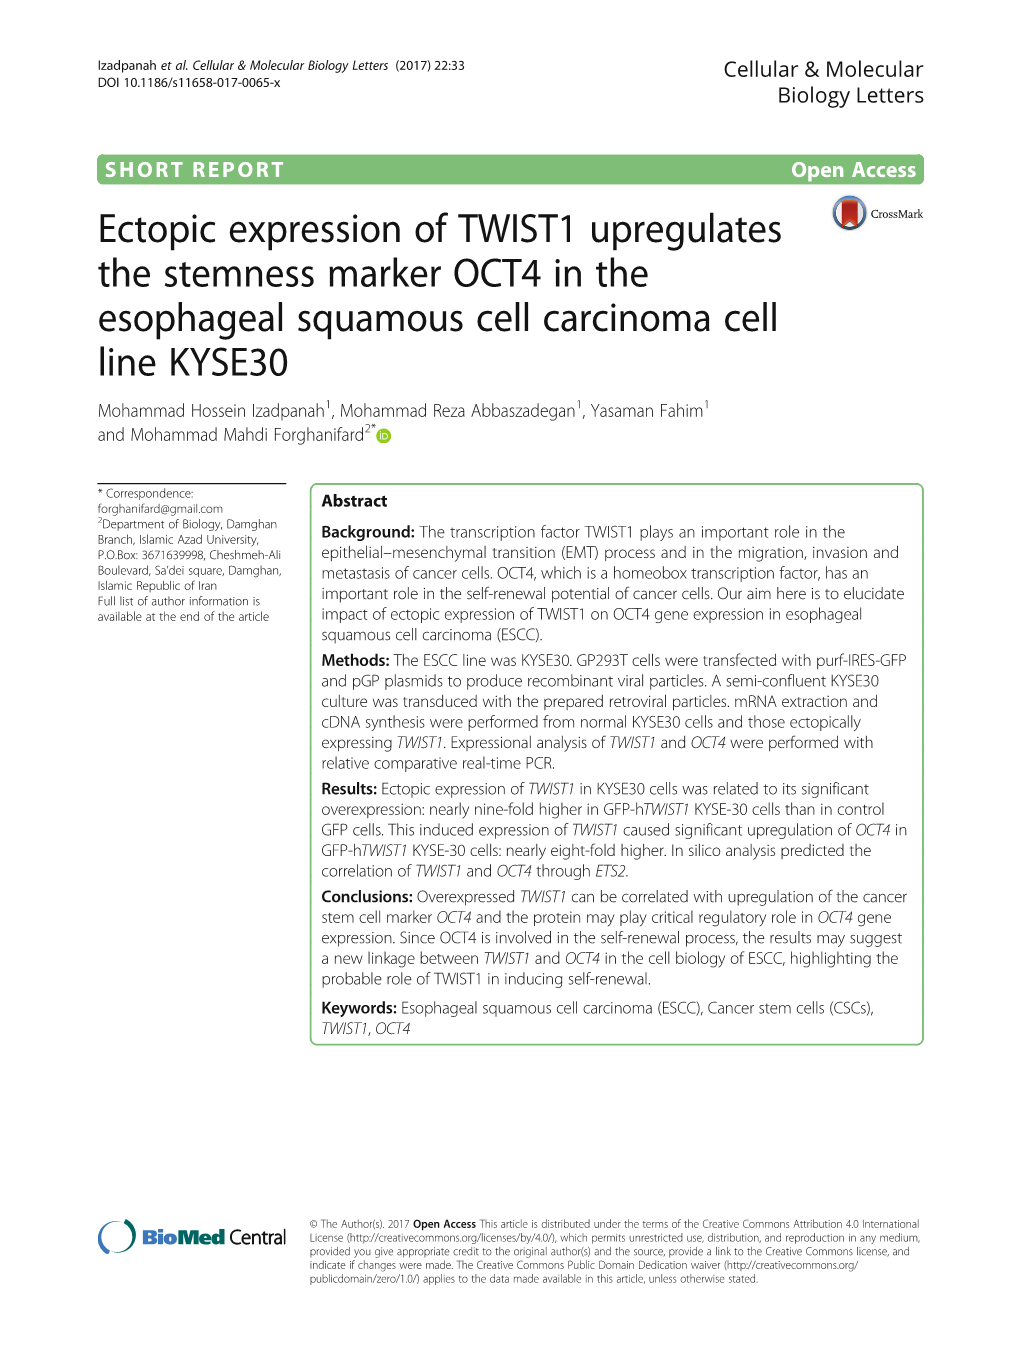 Ectopic Expression of TWIST1 Upregulates the Stemness Marker